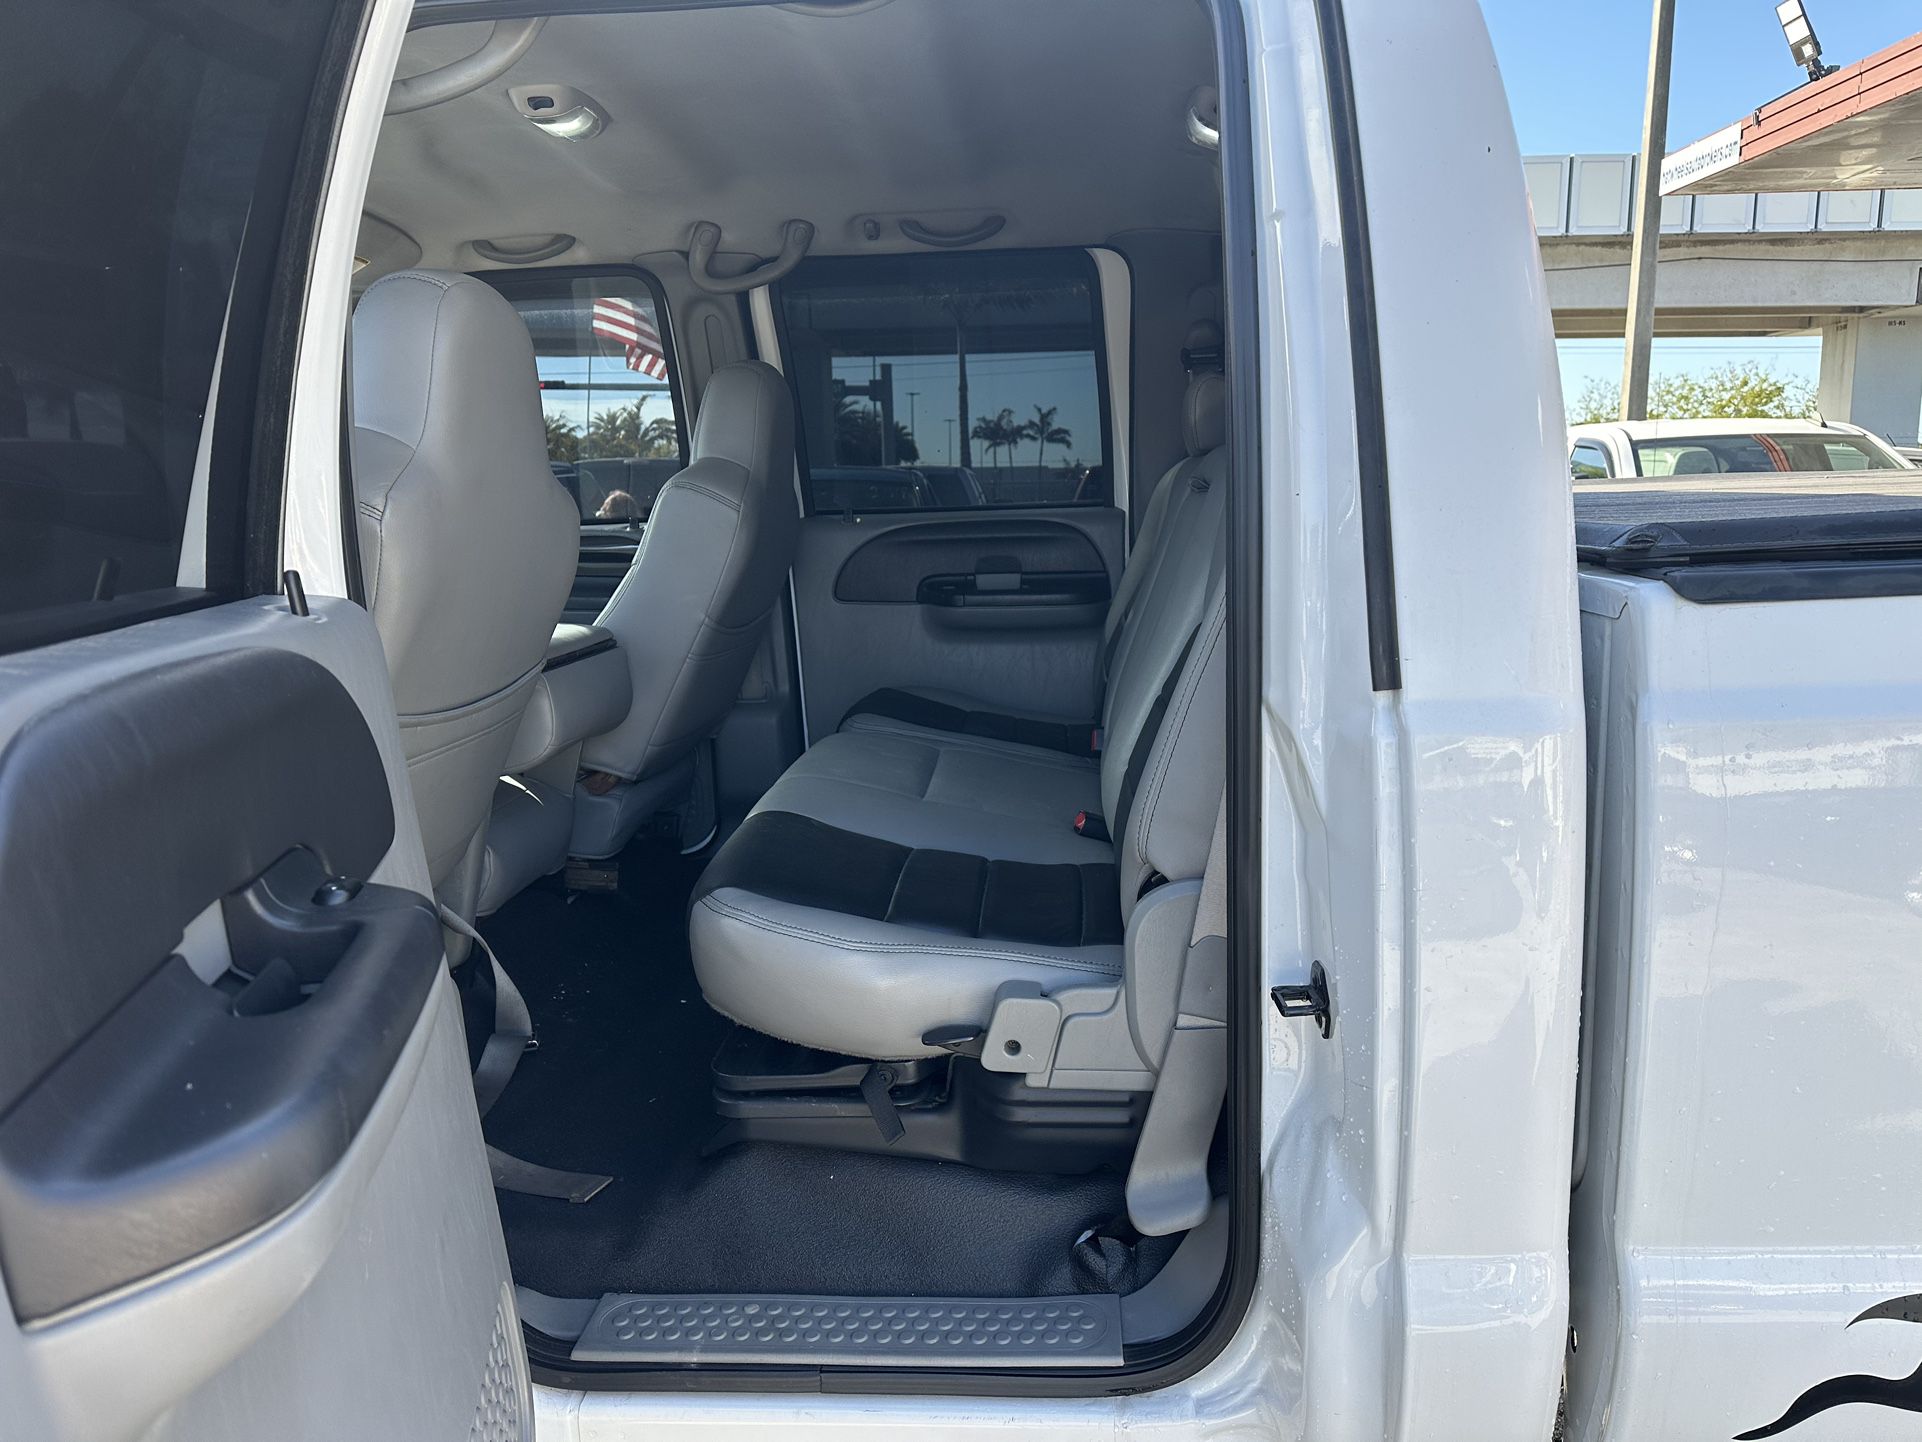 used 2006 ford F -350. Super Duty - interior view 3